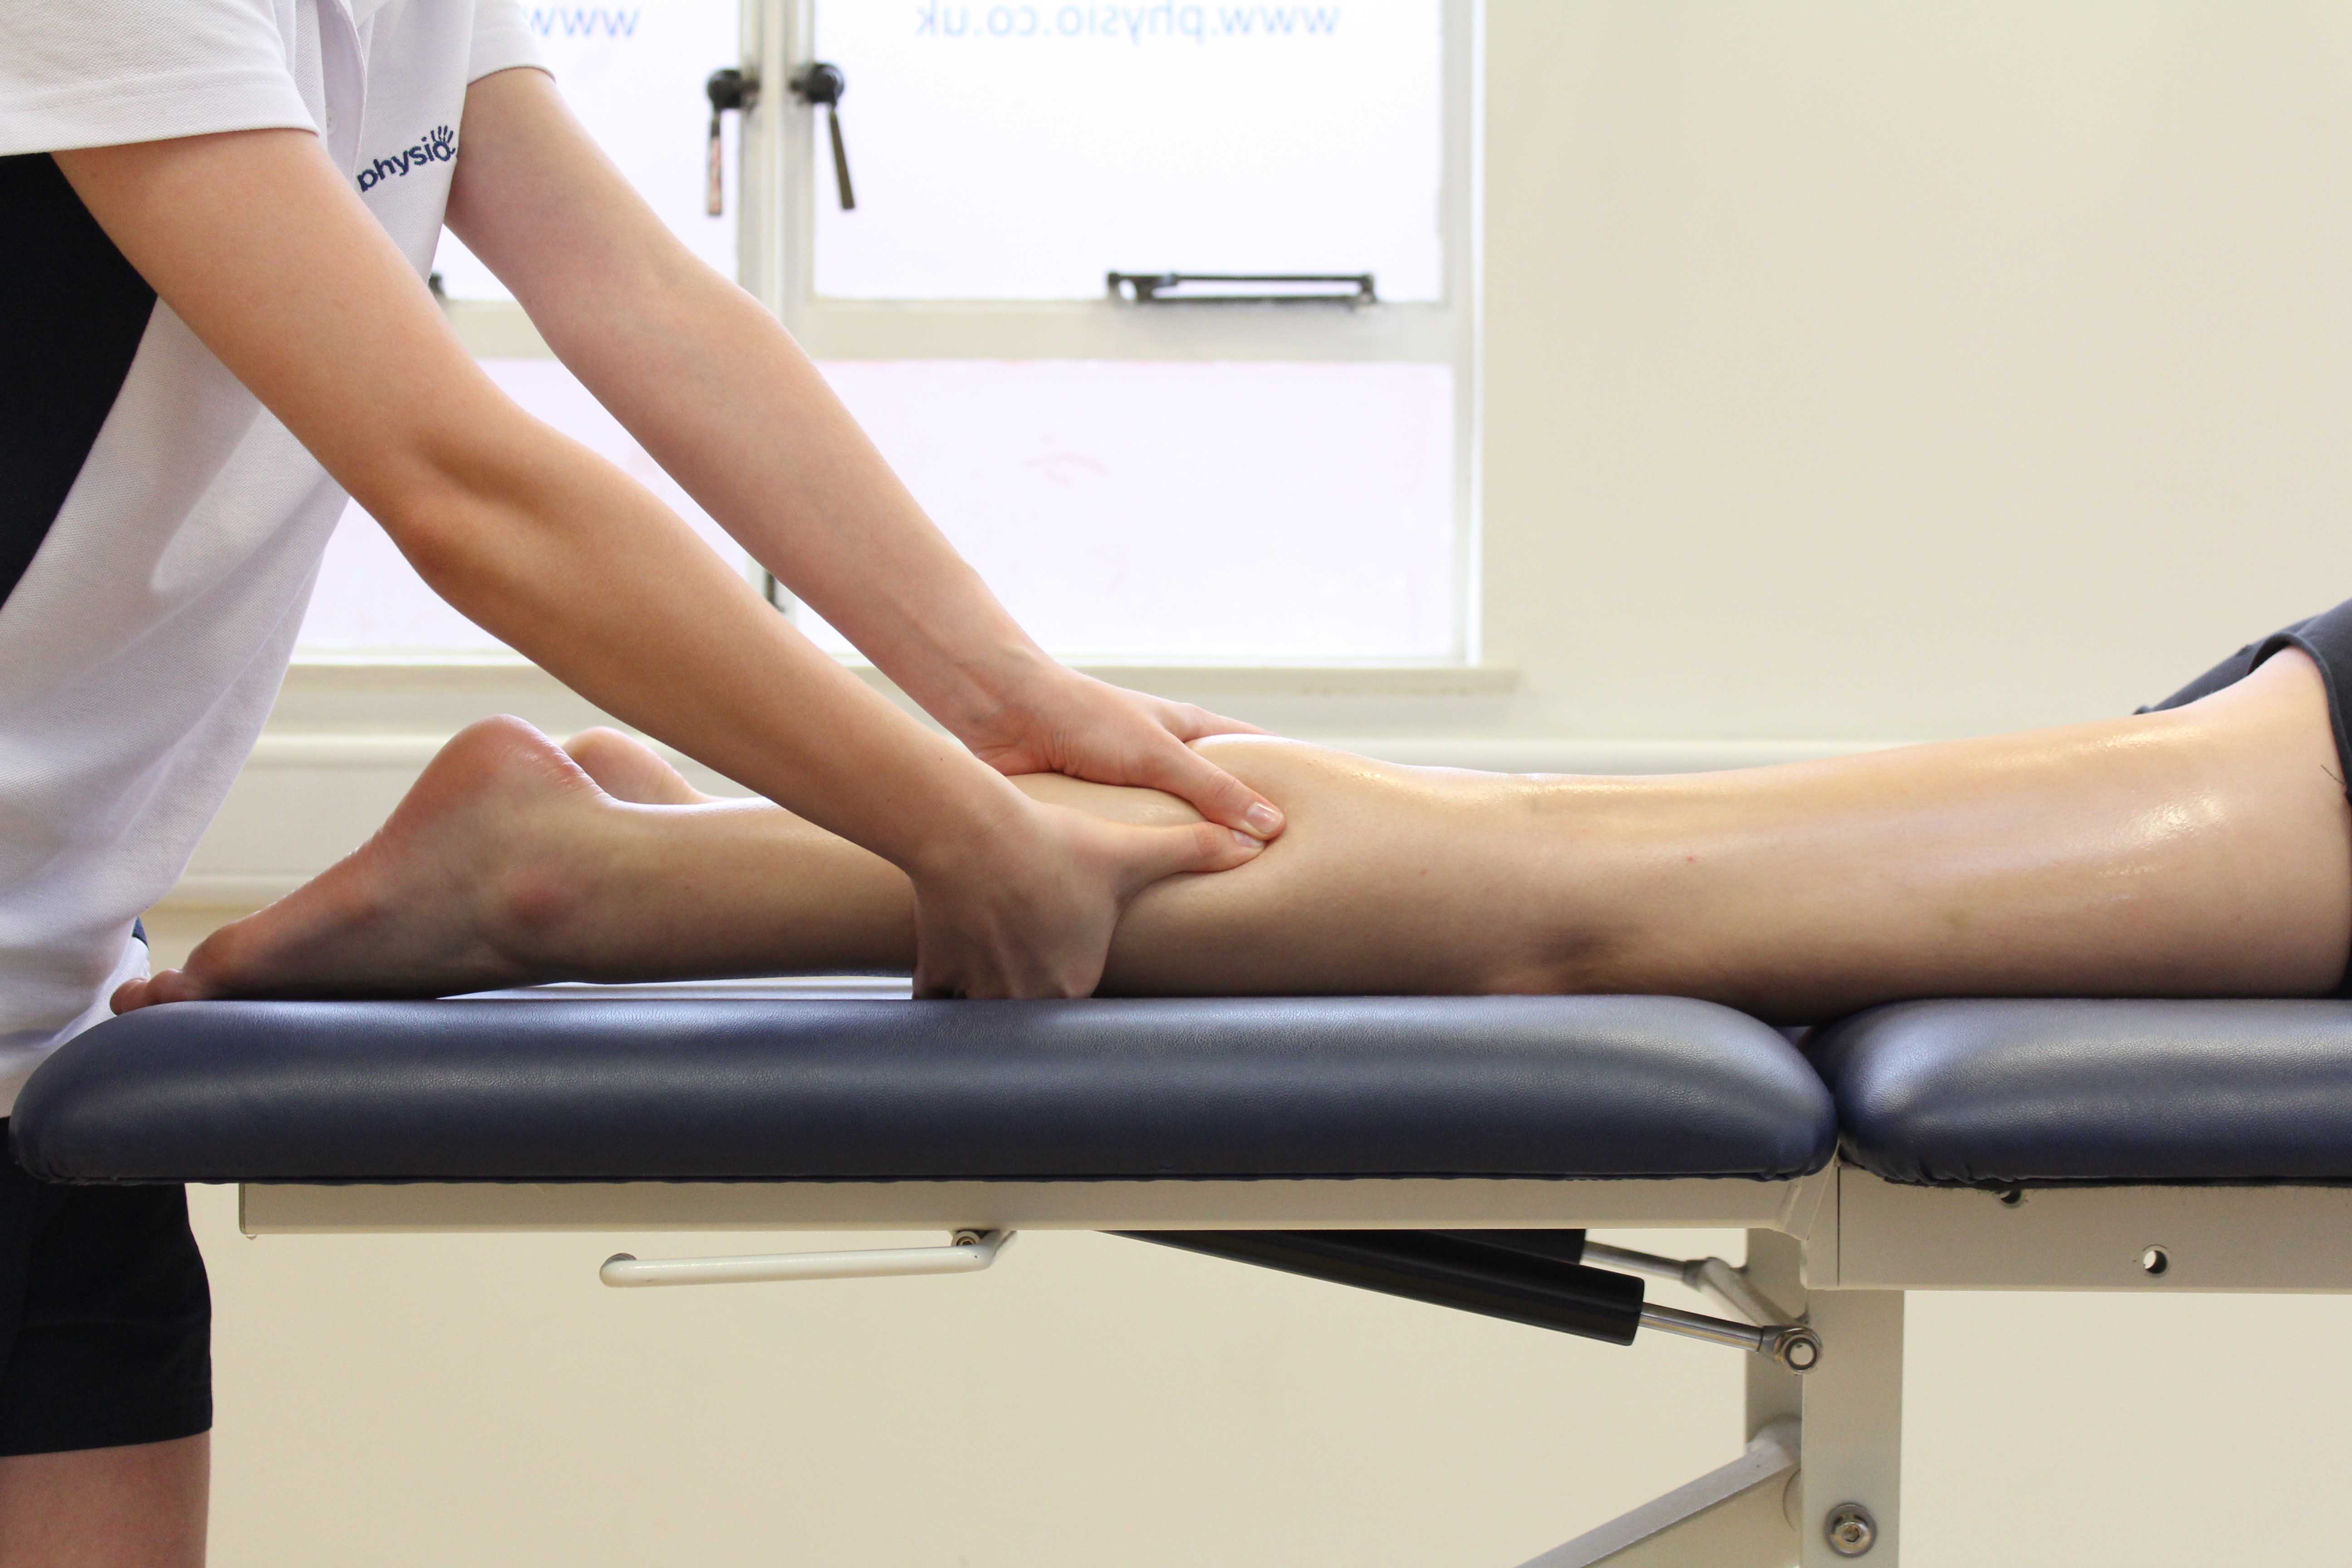 Accupressure massage of the gastroc nemius muscle by physiotherapist